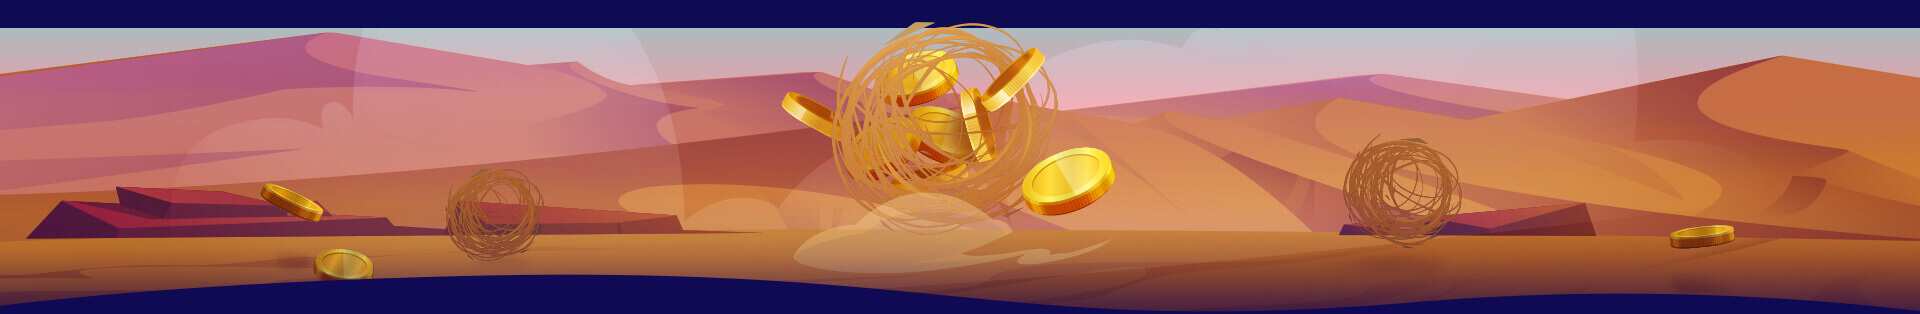 A serene desert scene with mountains, tumbling weeds, and scattered coins.